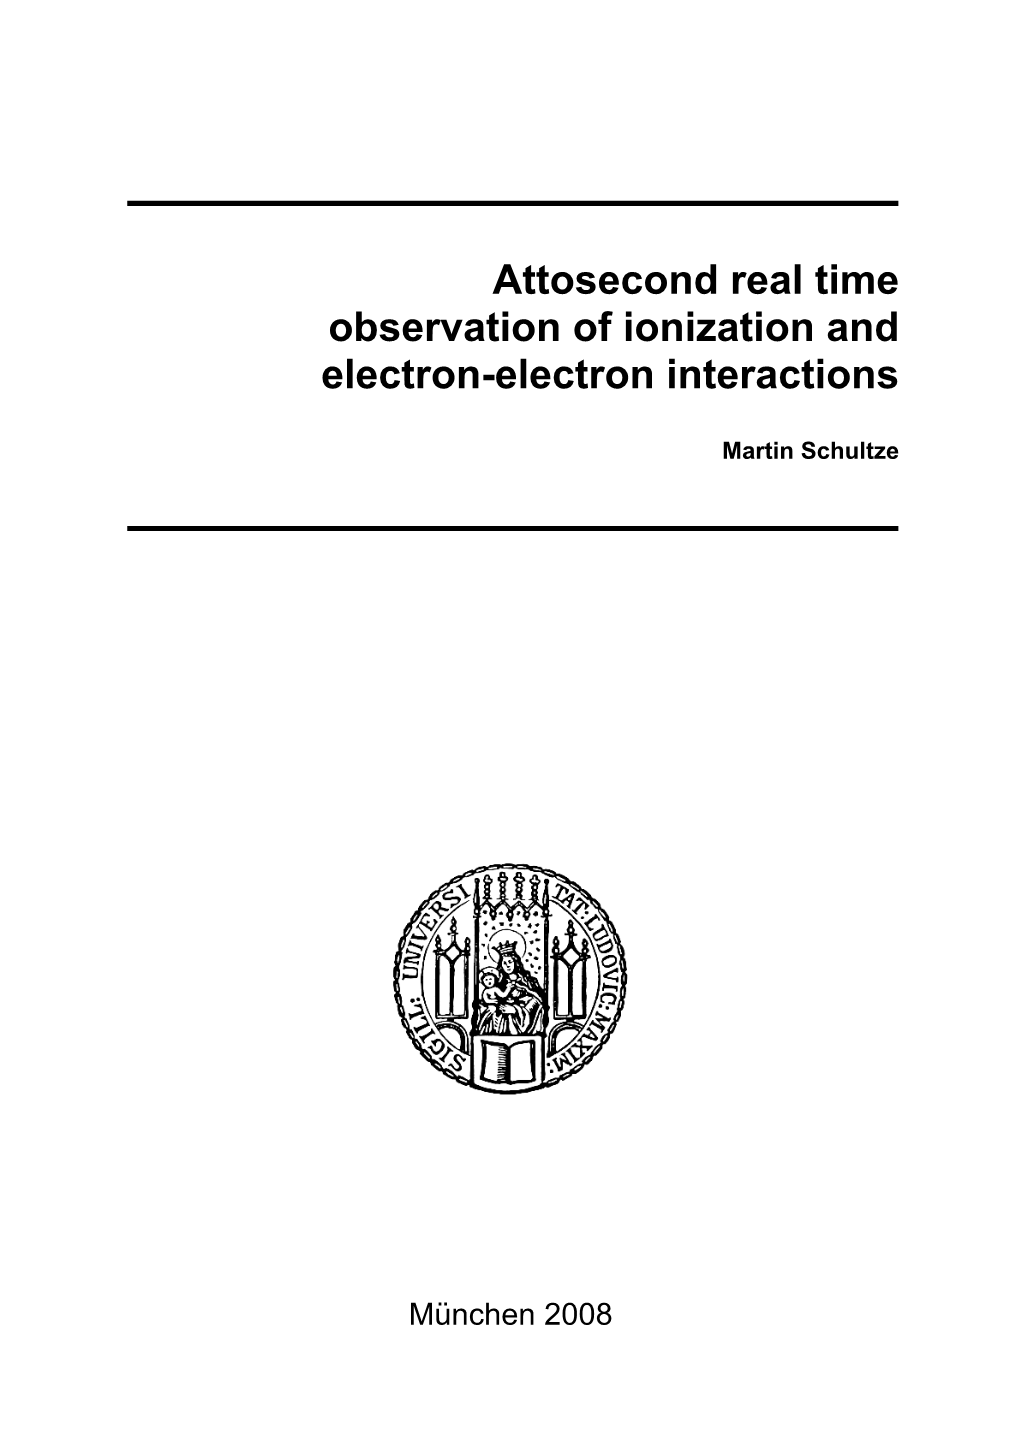 Attosecond Real Time Observation of Ionization and Electron-Electron Interactions